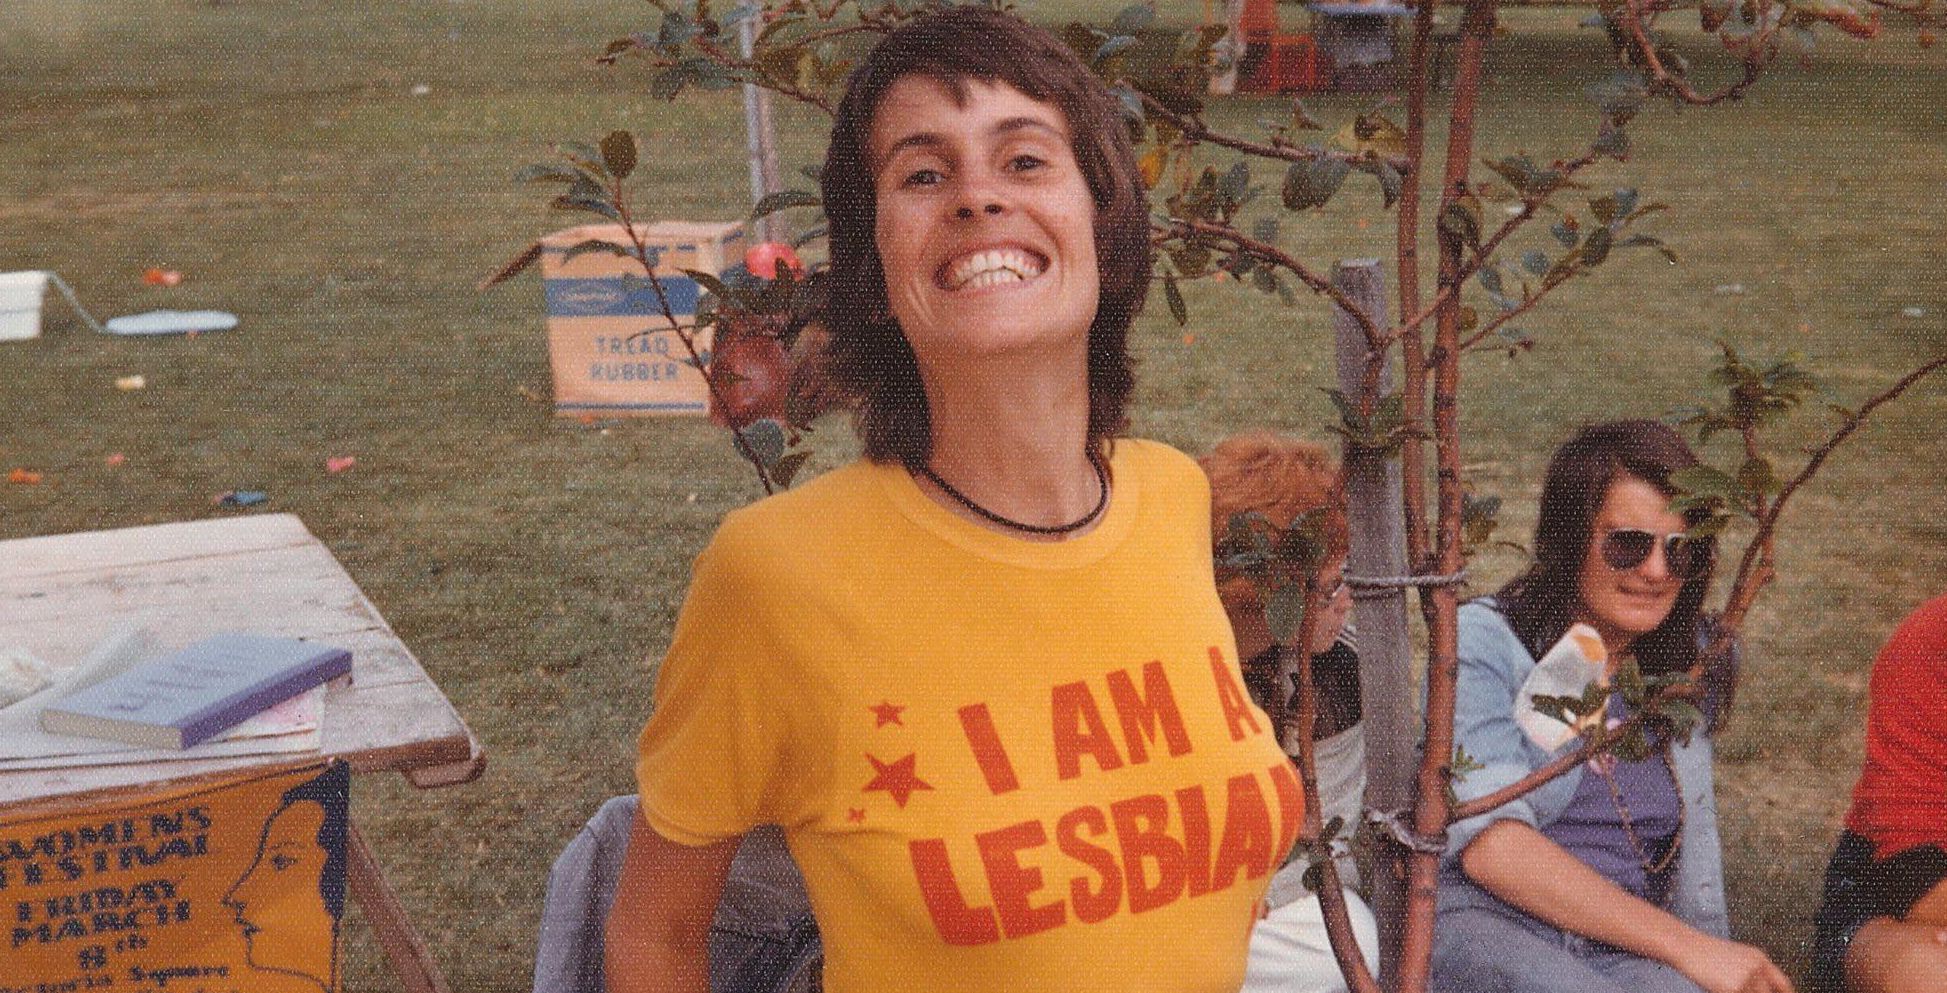 Do we need a Lesbian Visibility Day?